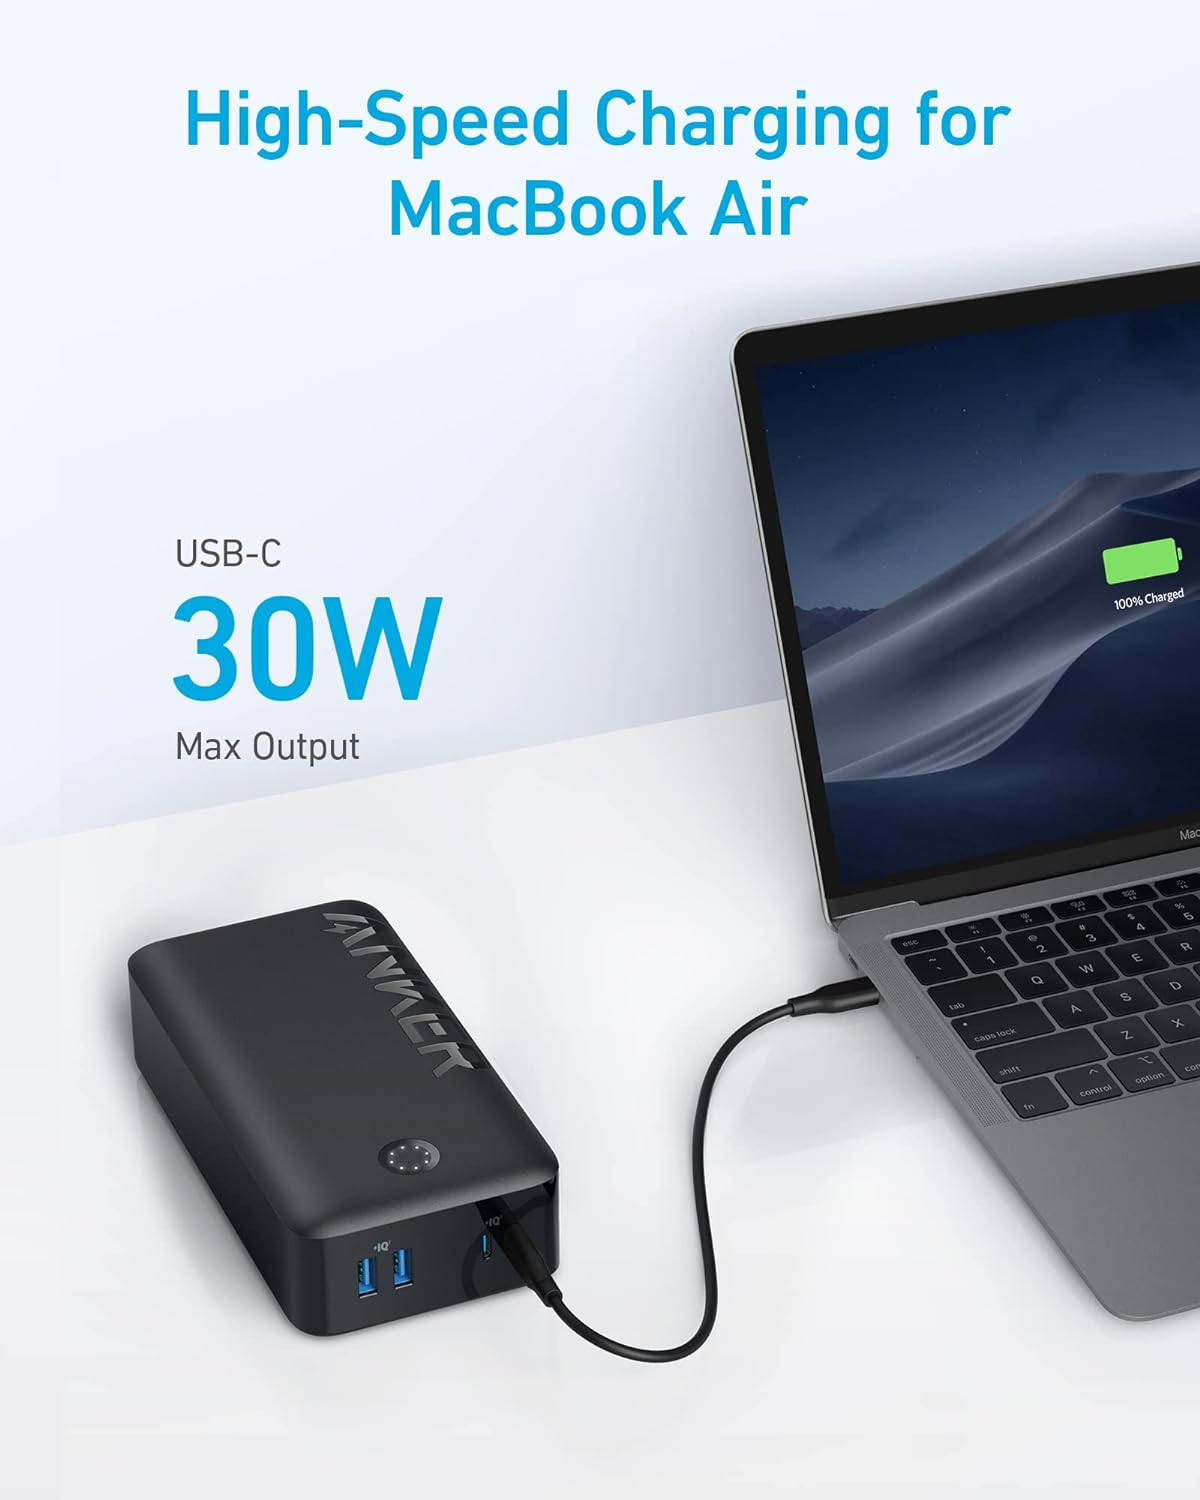 Anker A1377H11 347 Portable Charger, Power Bank, 40K 30W Battery Pack with USB-C High-Speed Charging